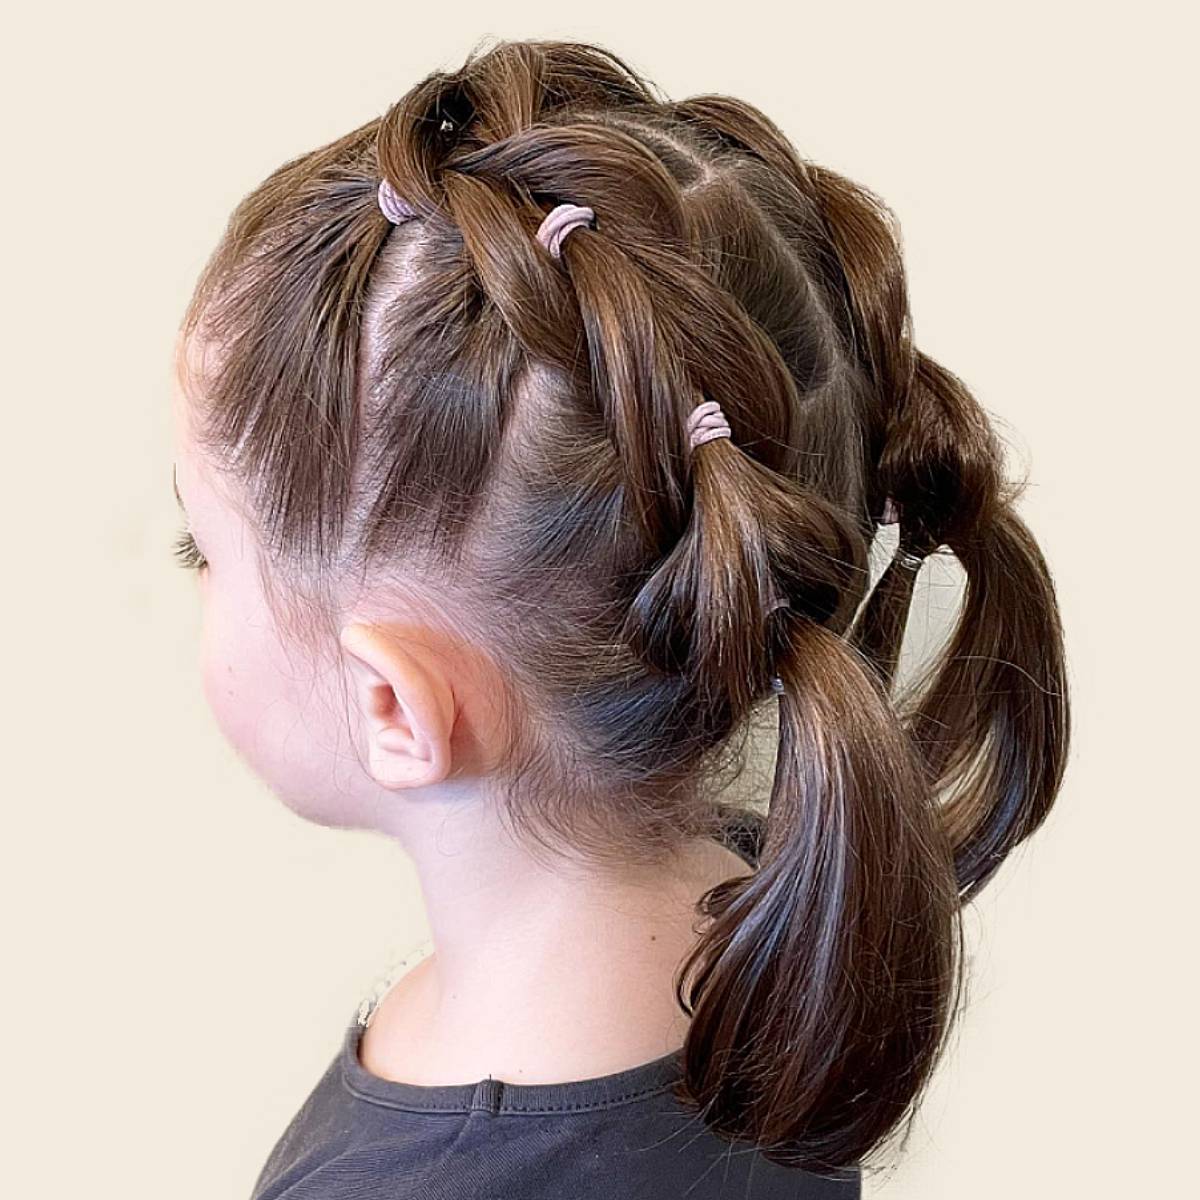 Springtime Hairstyle Ideas For Your Little One - Cute Girls Hairstyles-hkpdtq2012.edu.vn